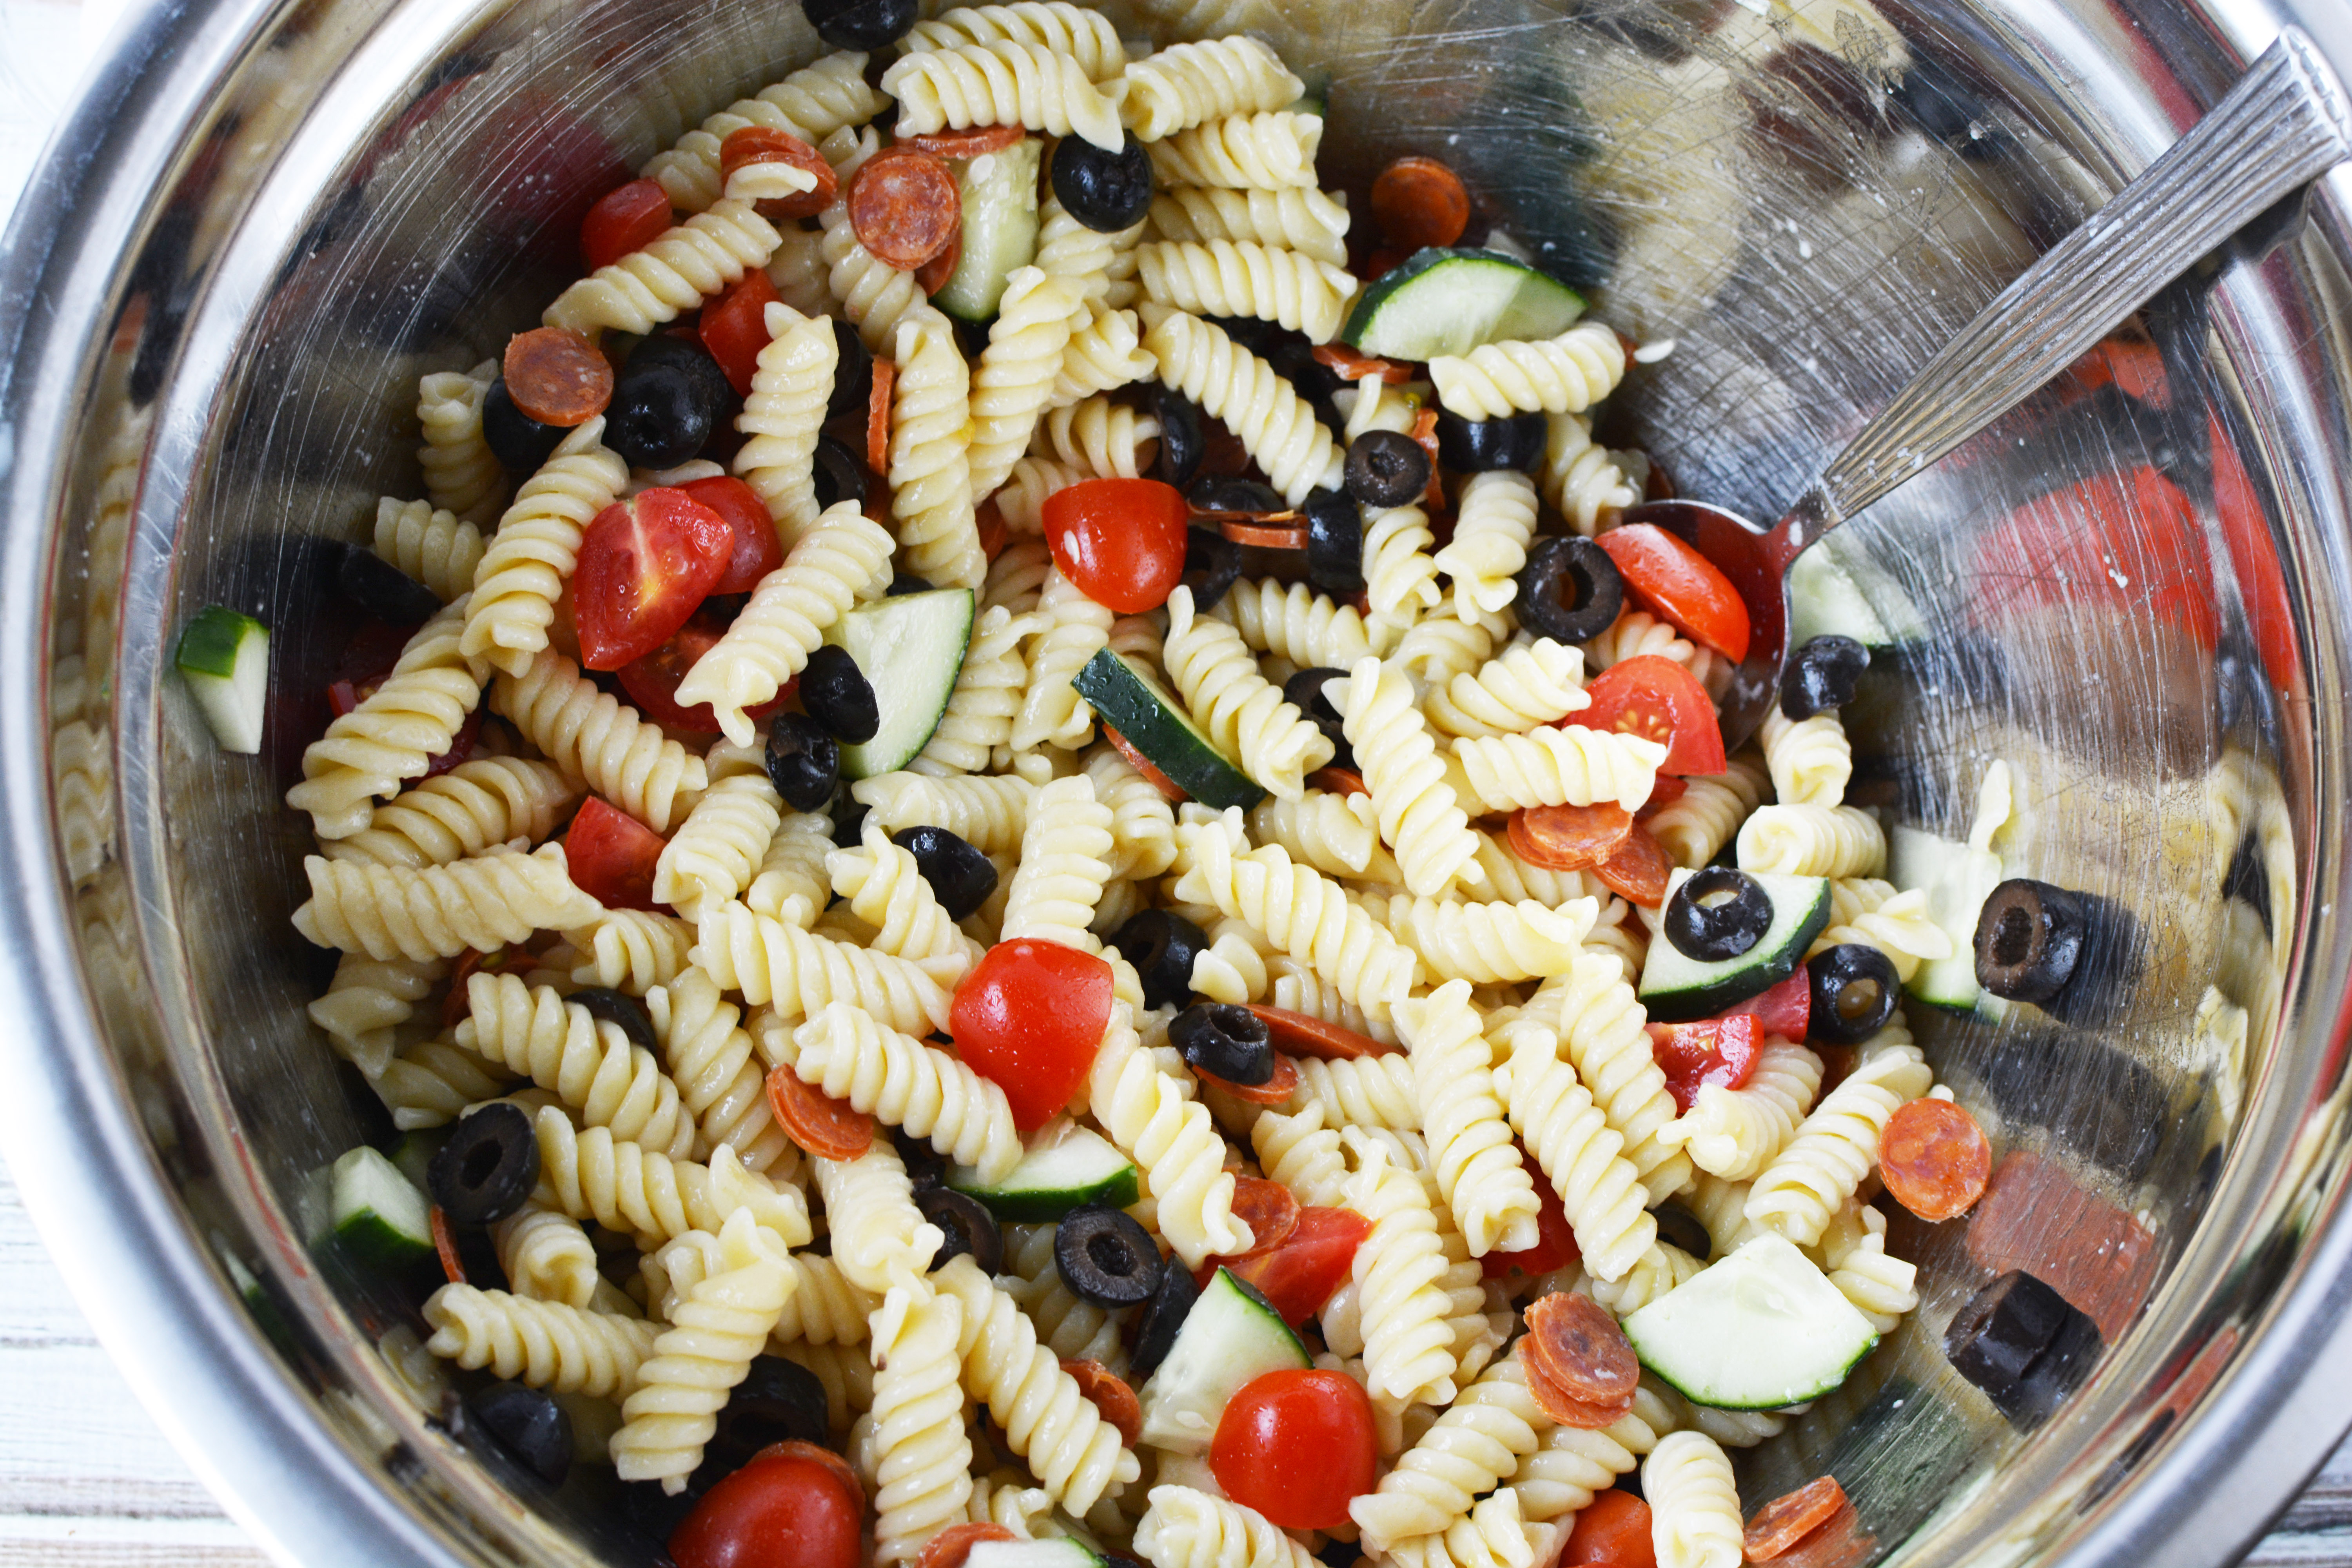 rotini salad being mixed with Italian salad dressing in a bowl.